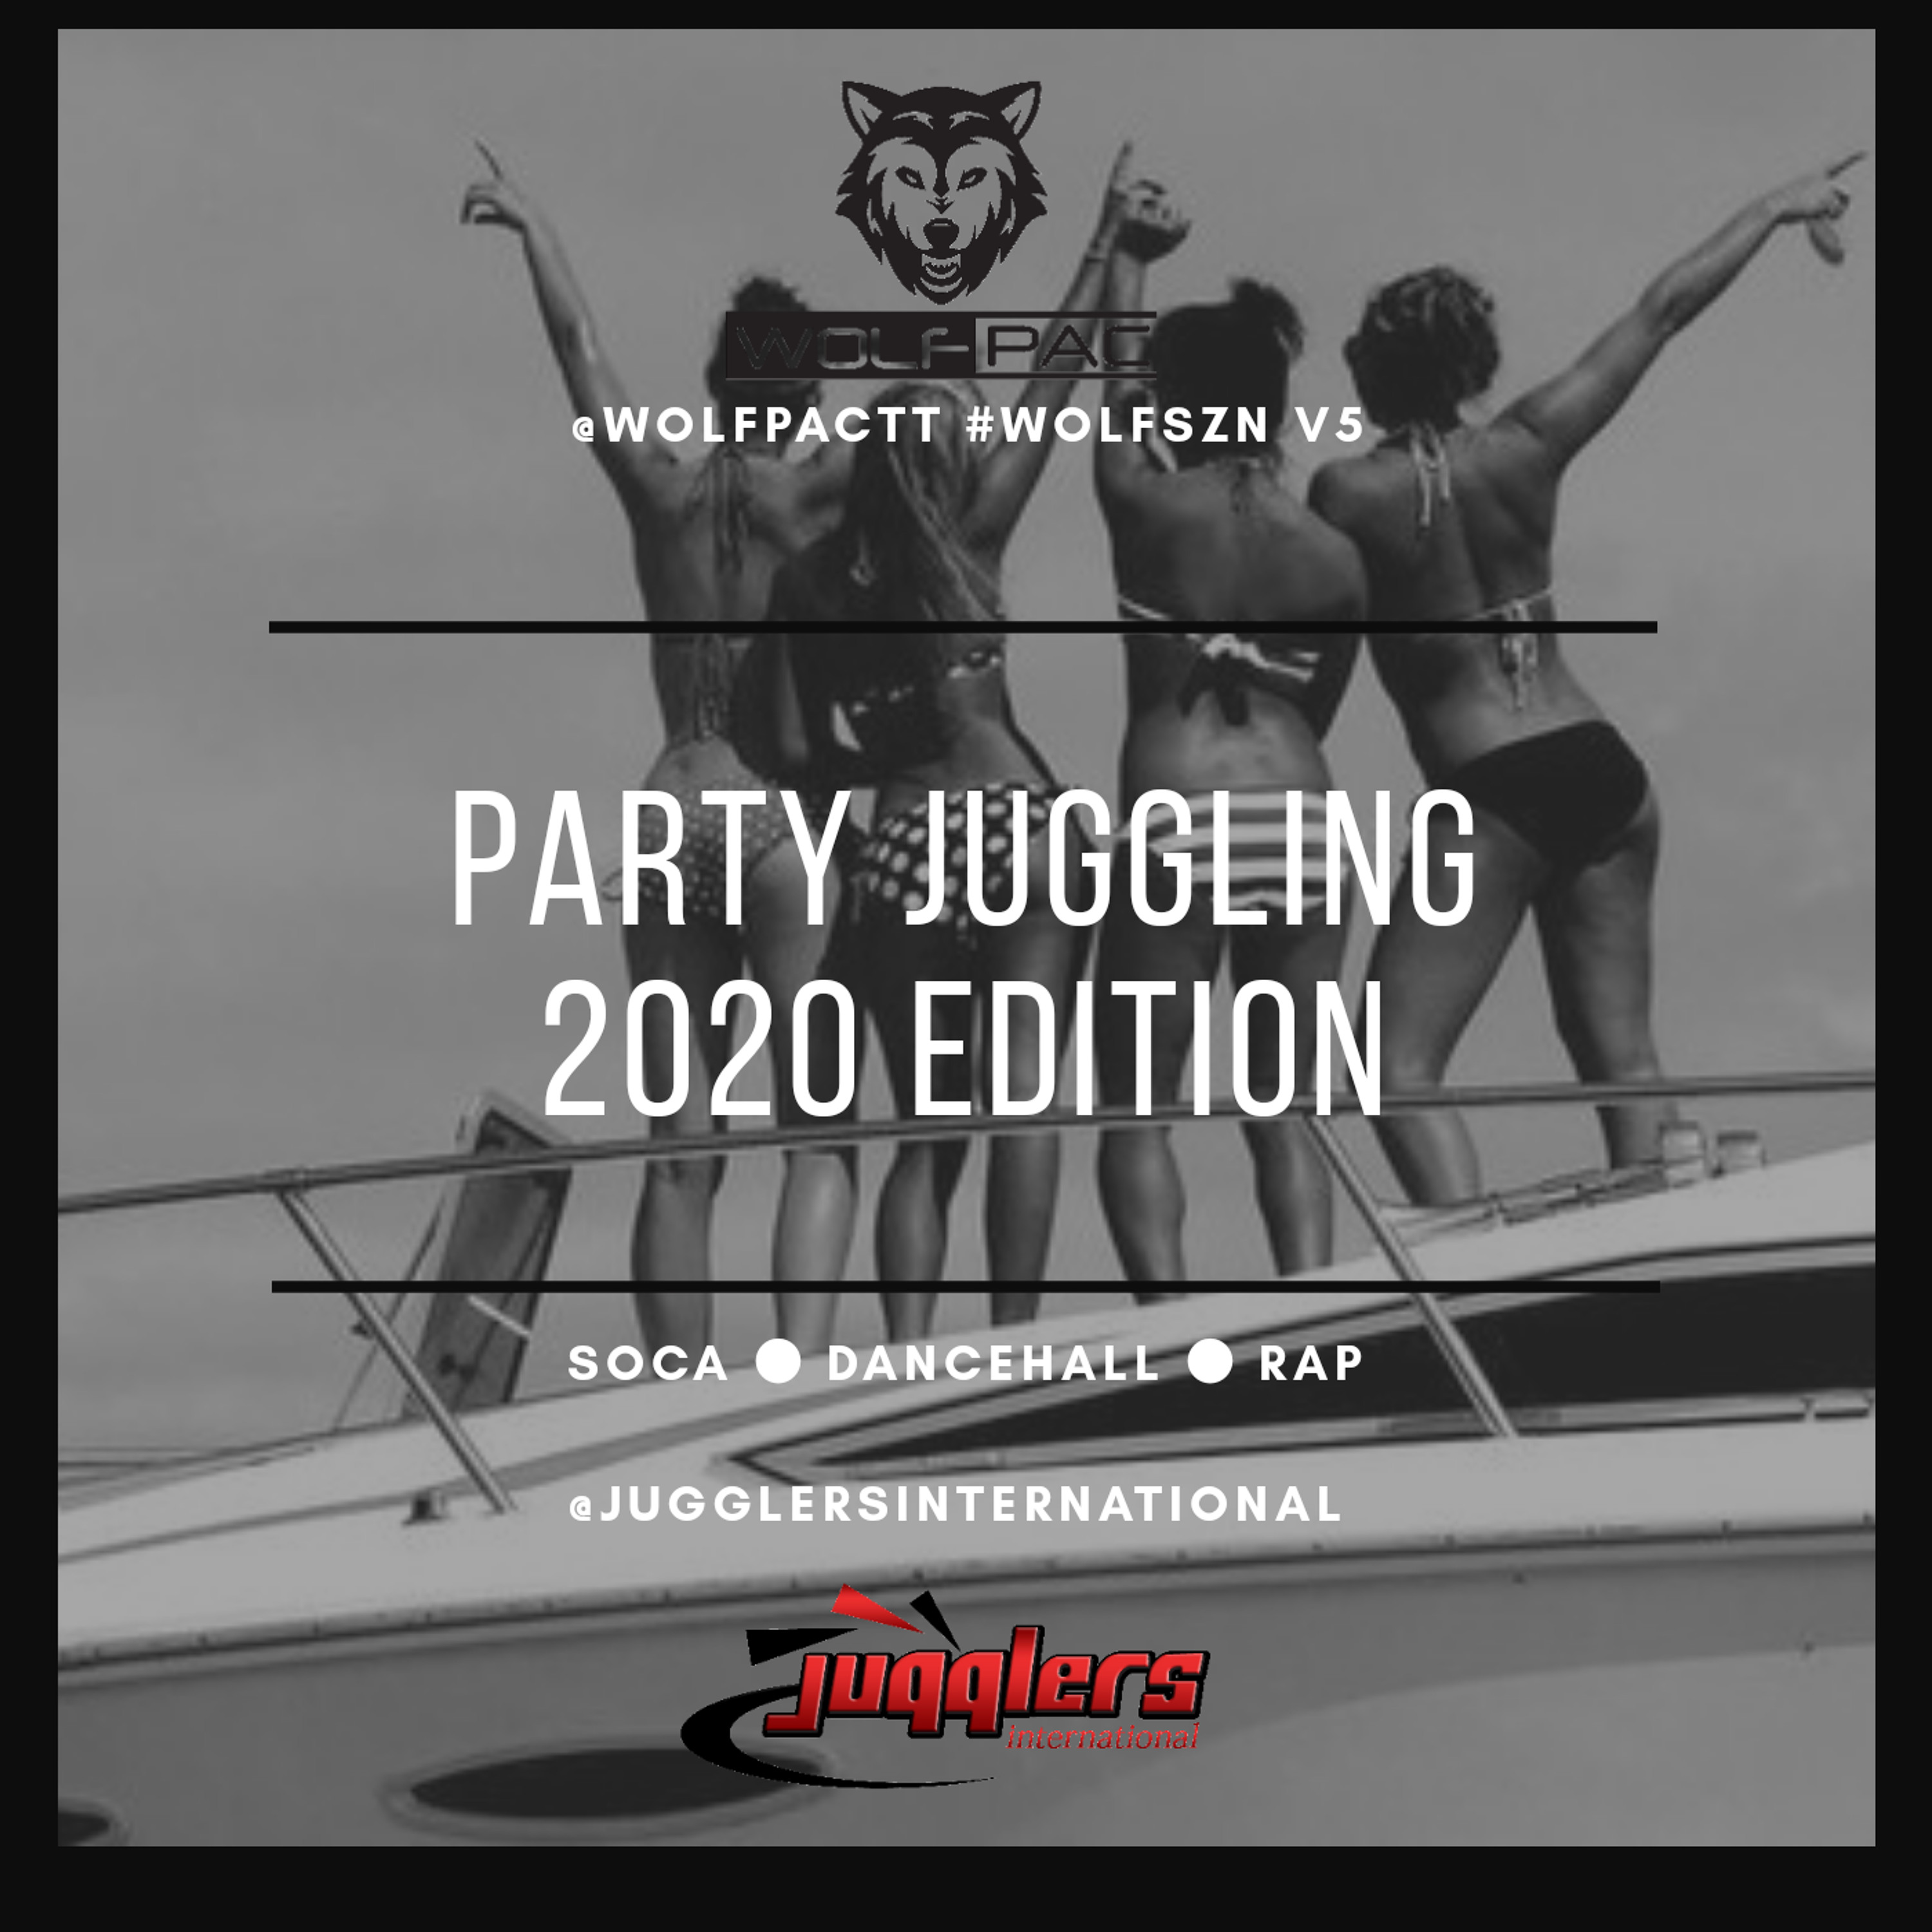 @WOLFPACTT #WOLFSZN V5 - PARTY JUGGLING 2020 EDITION